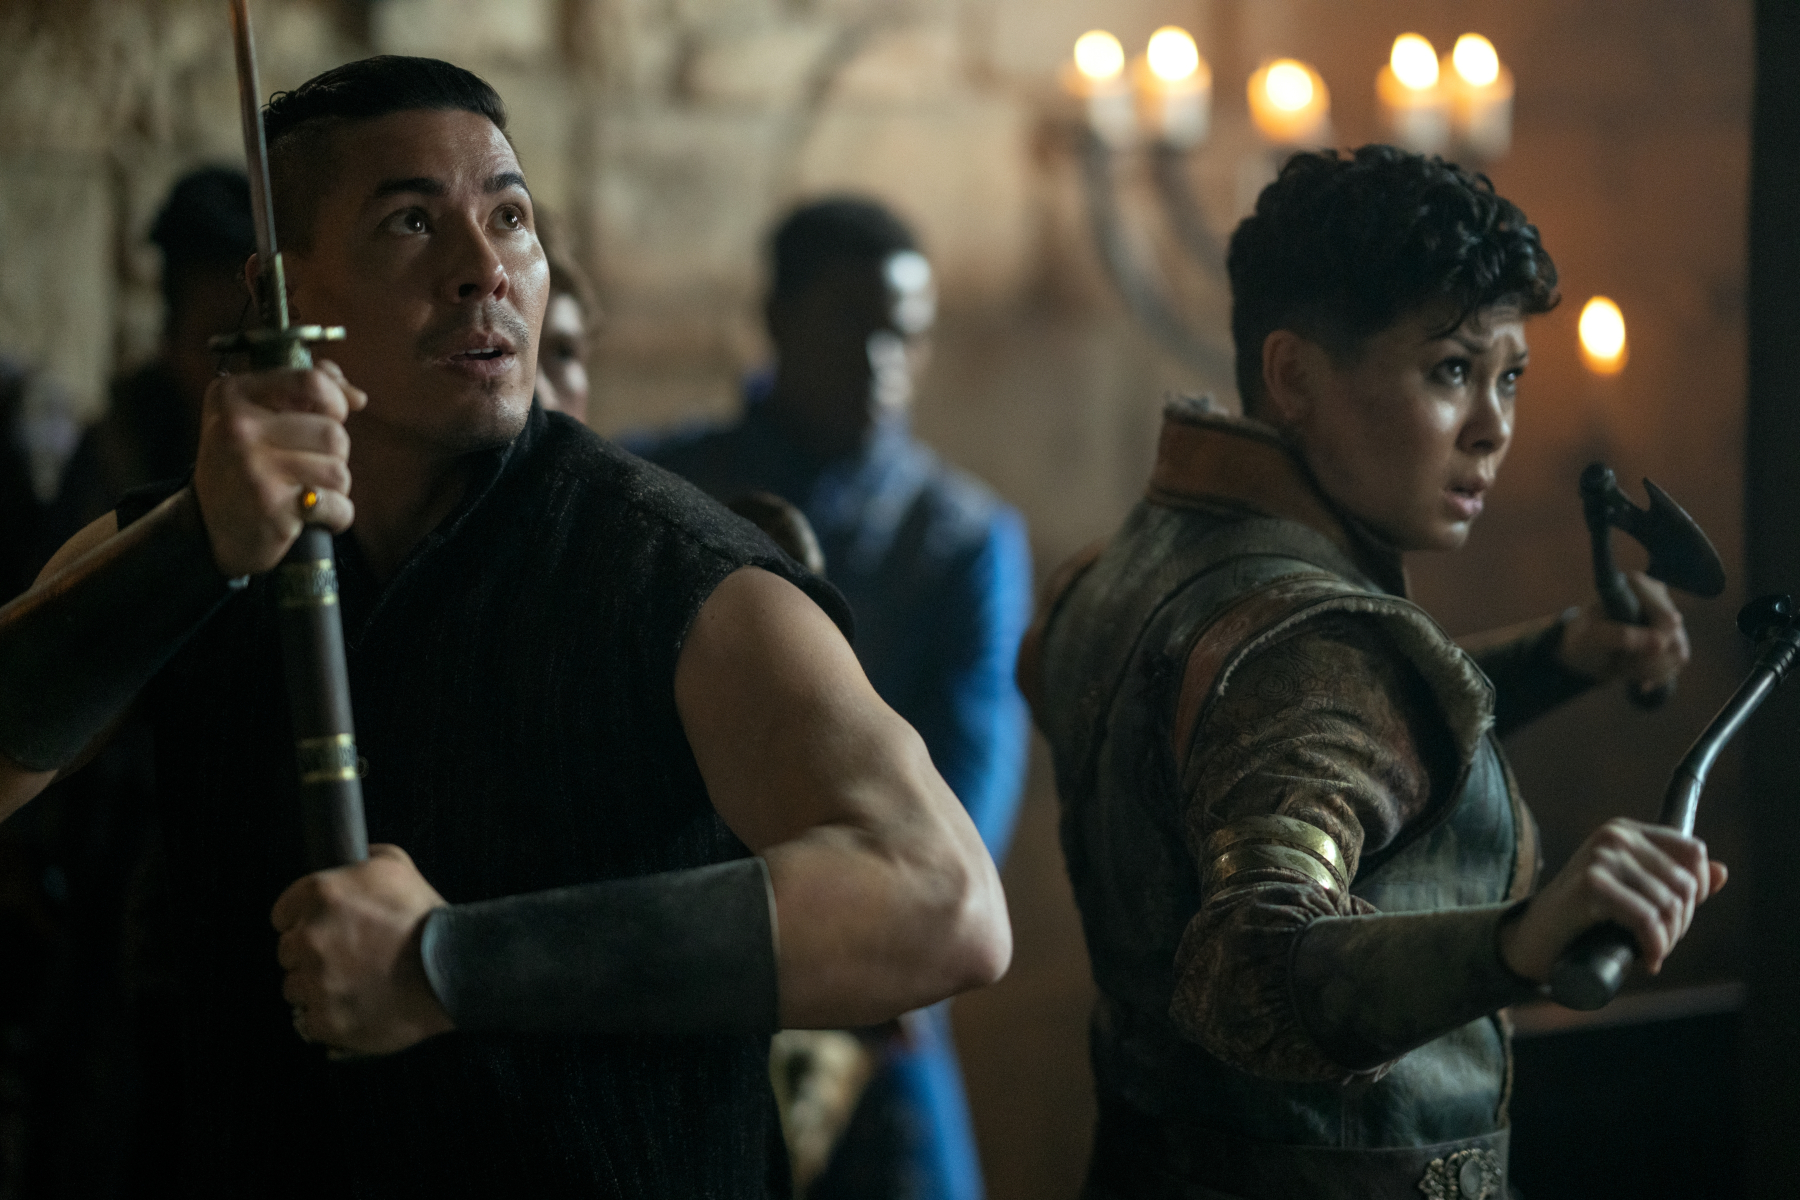 Lewis Tan and Anna Leong Brophy as Tolya and Tamar in 'Shadow and Bone' Season 2. They're holding up weapons and look ready to fight.